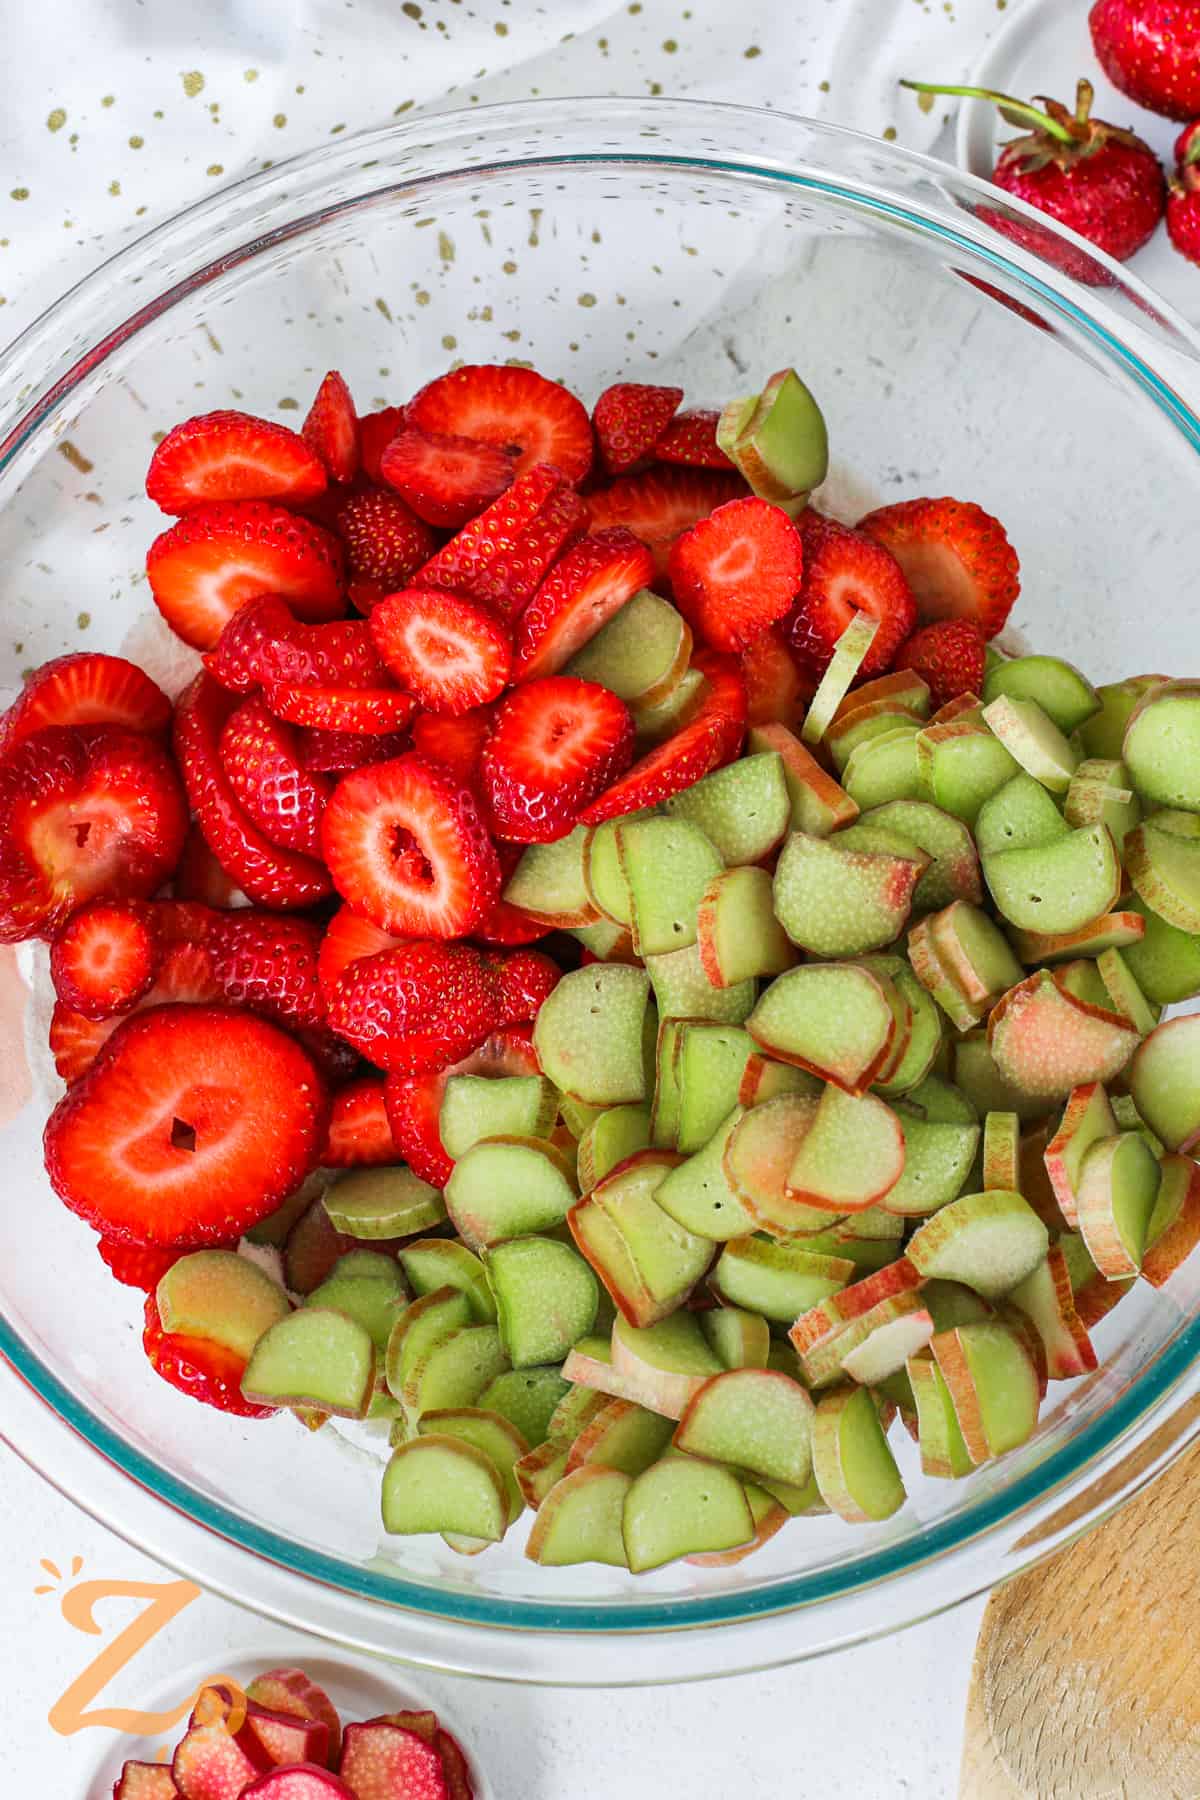 strawberry and rhubarb sliced in a bowl